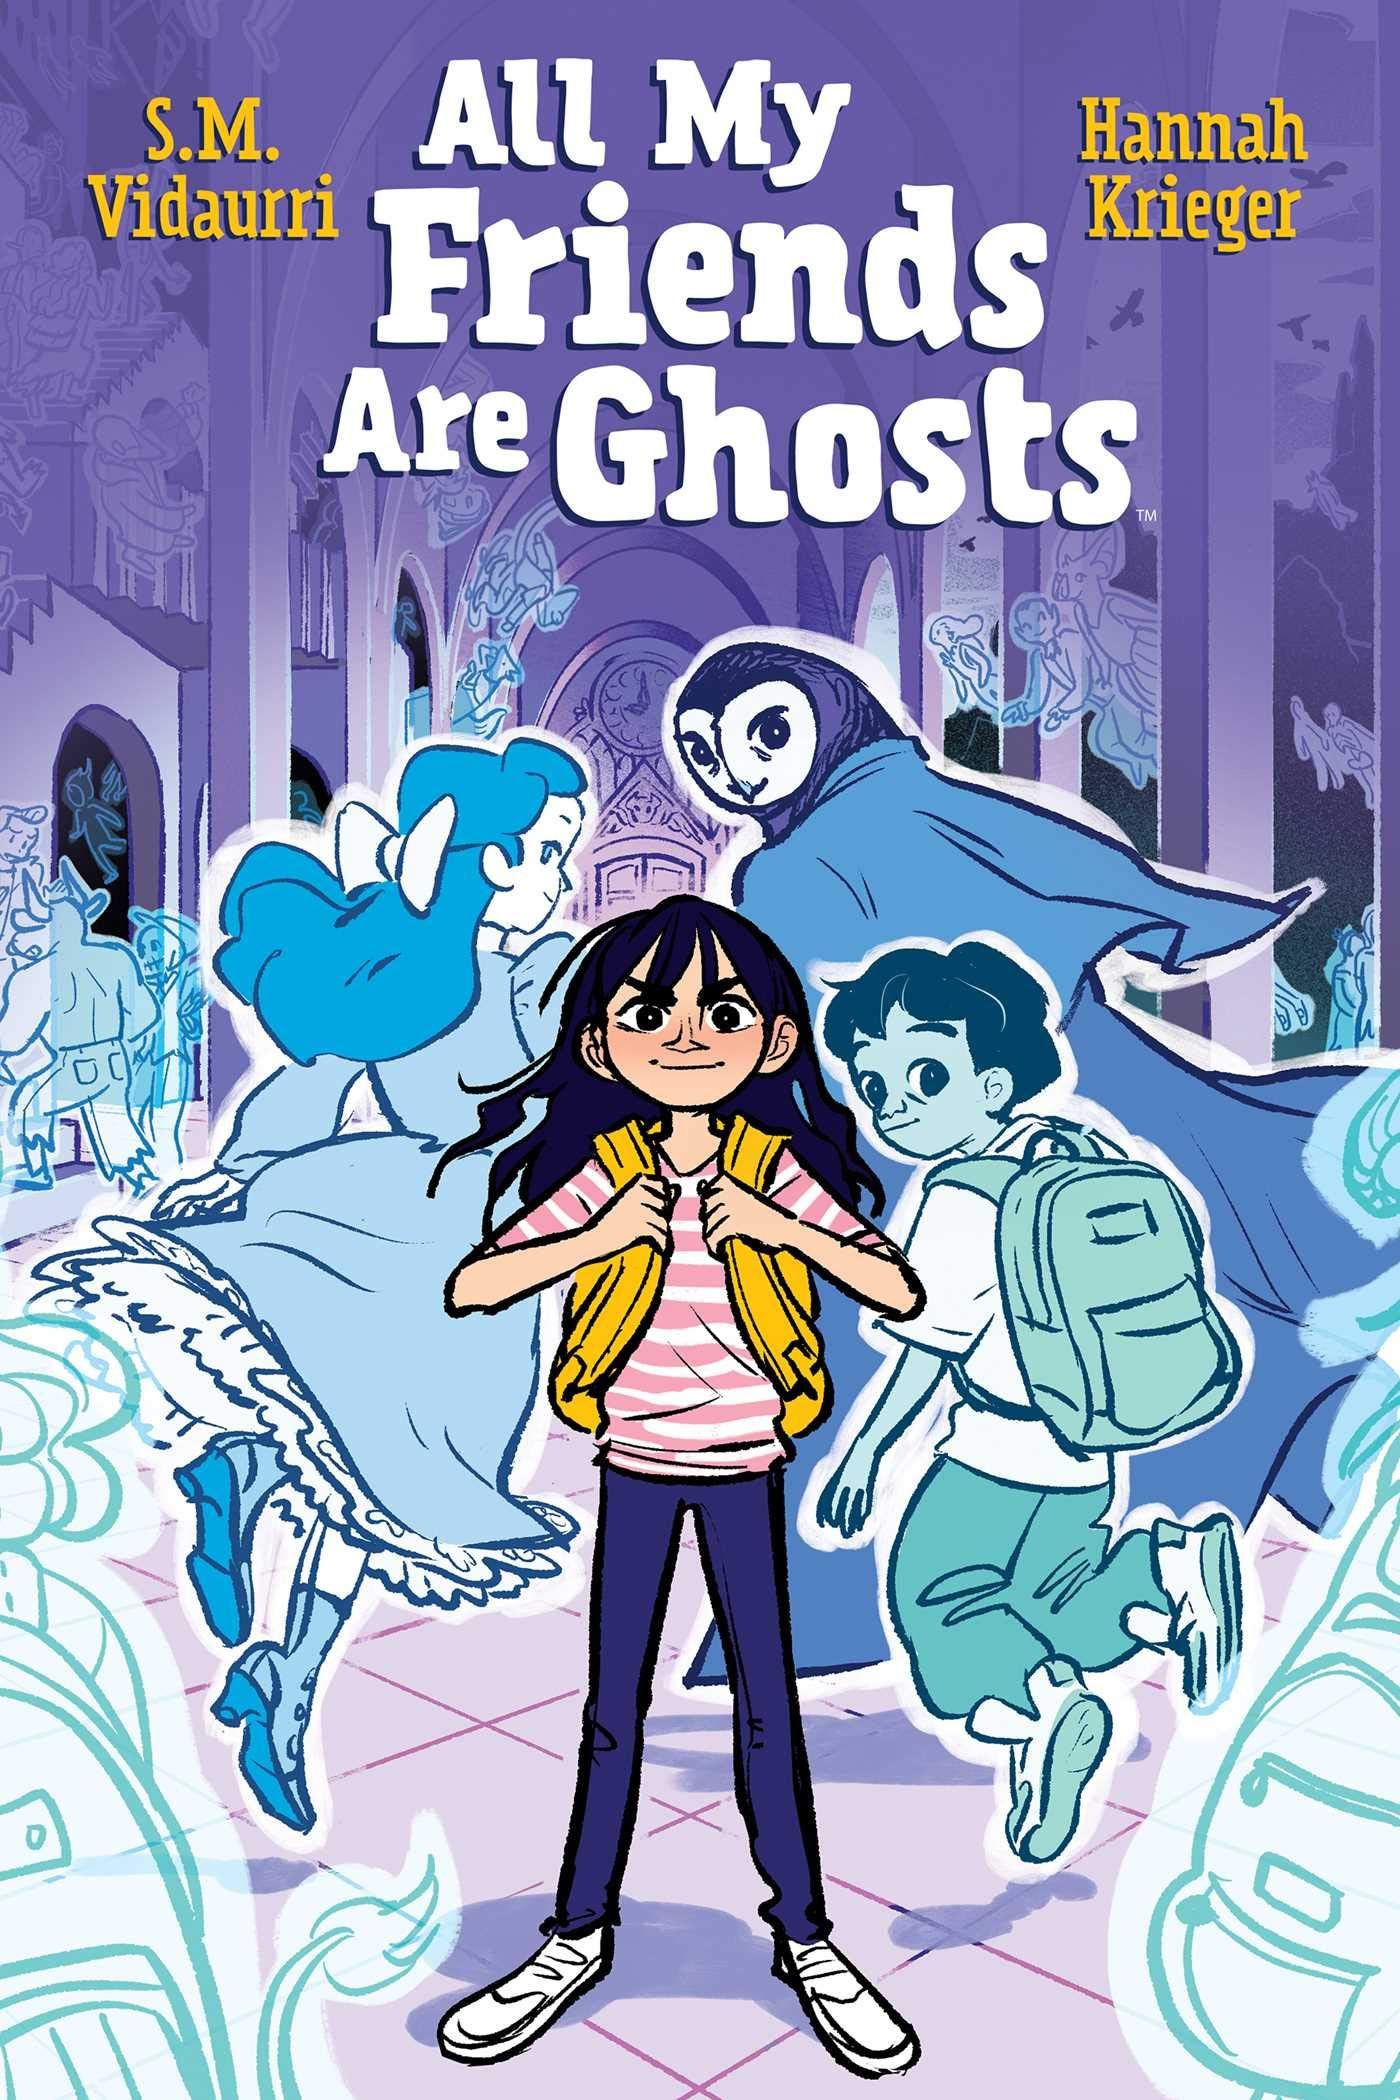 10 New Graphic Novels to Read for Women's History Month: All My Friends Are Ghosts